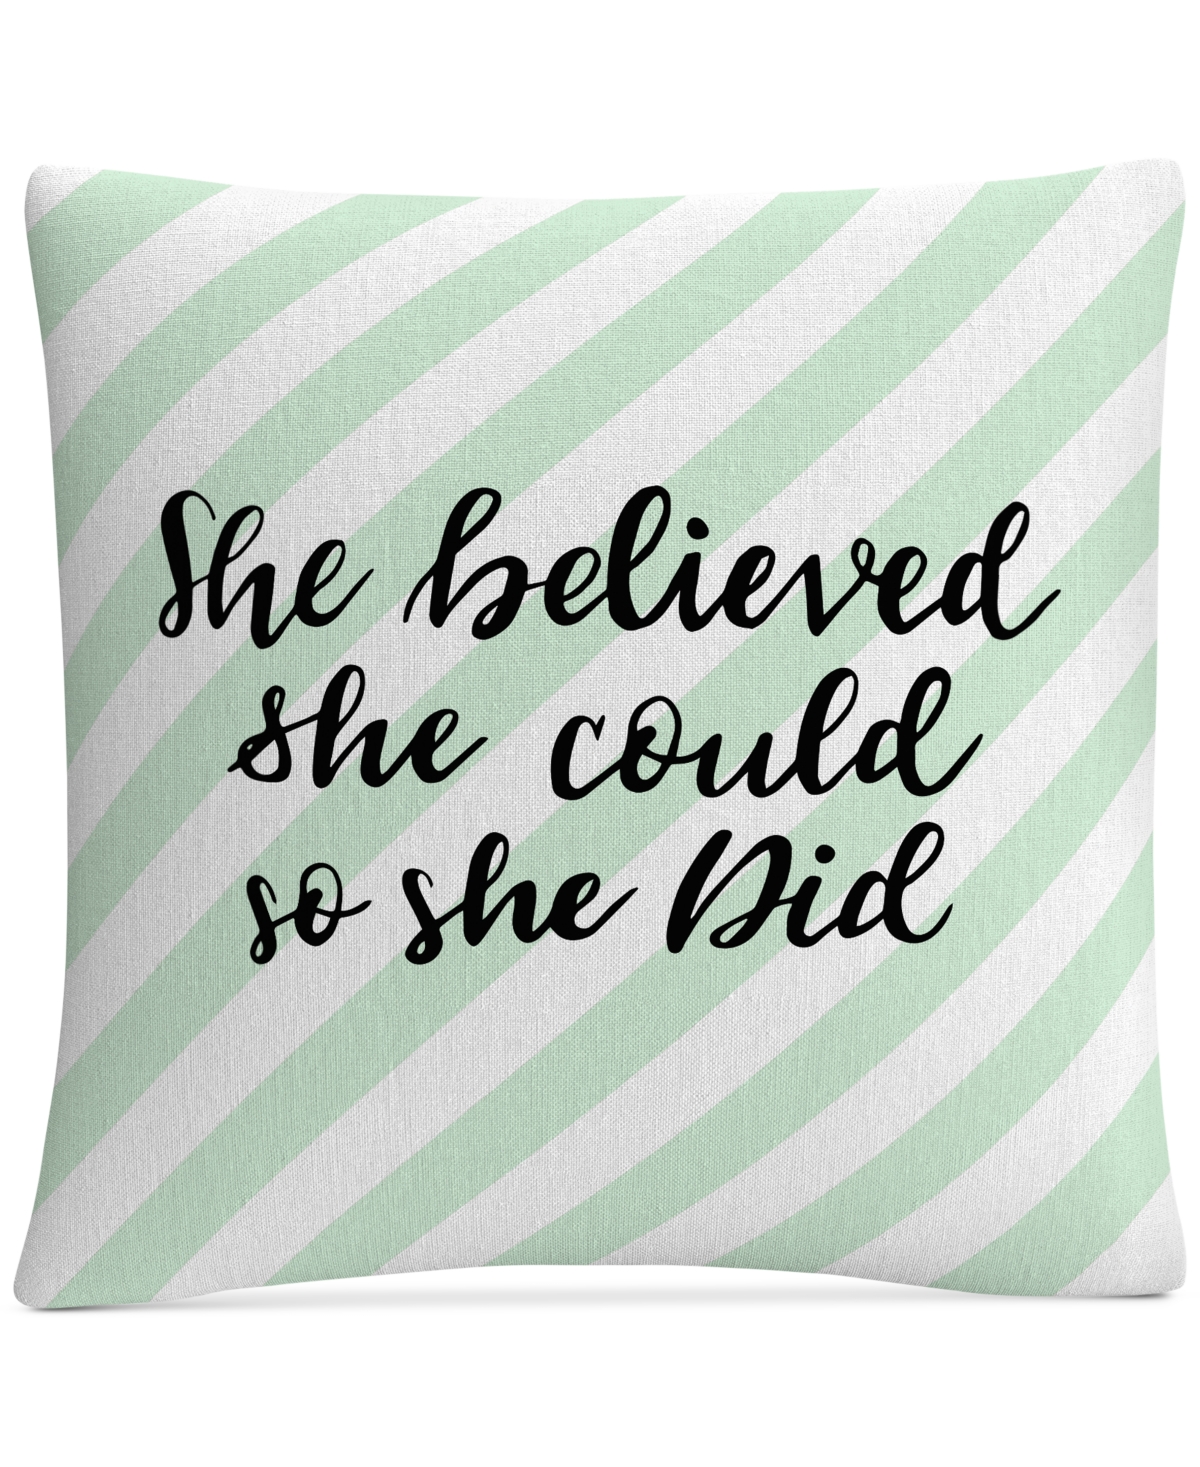 Abc She Believed She Could Decorative Pillow, 16 x 16